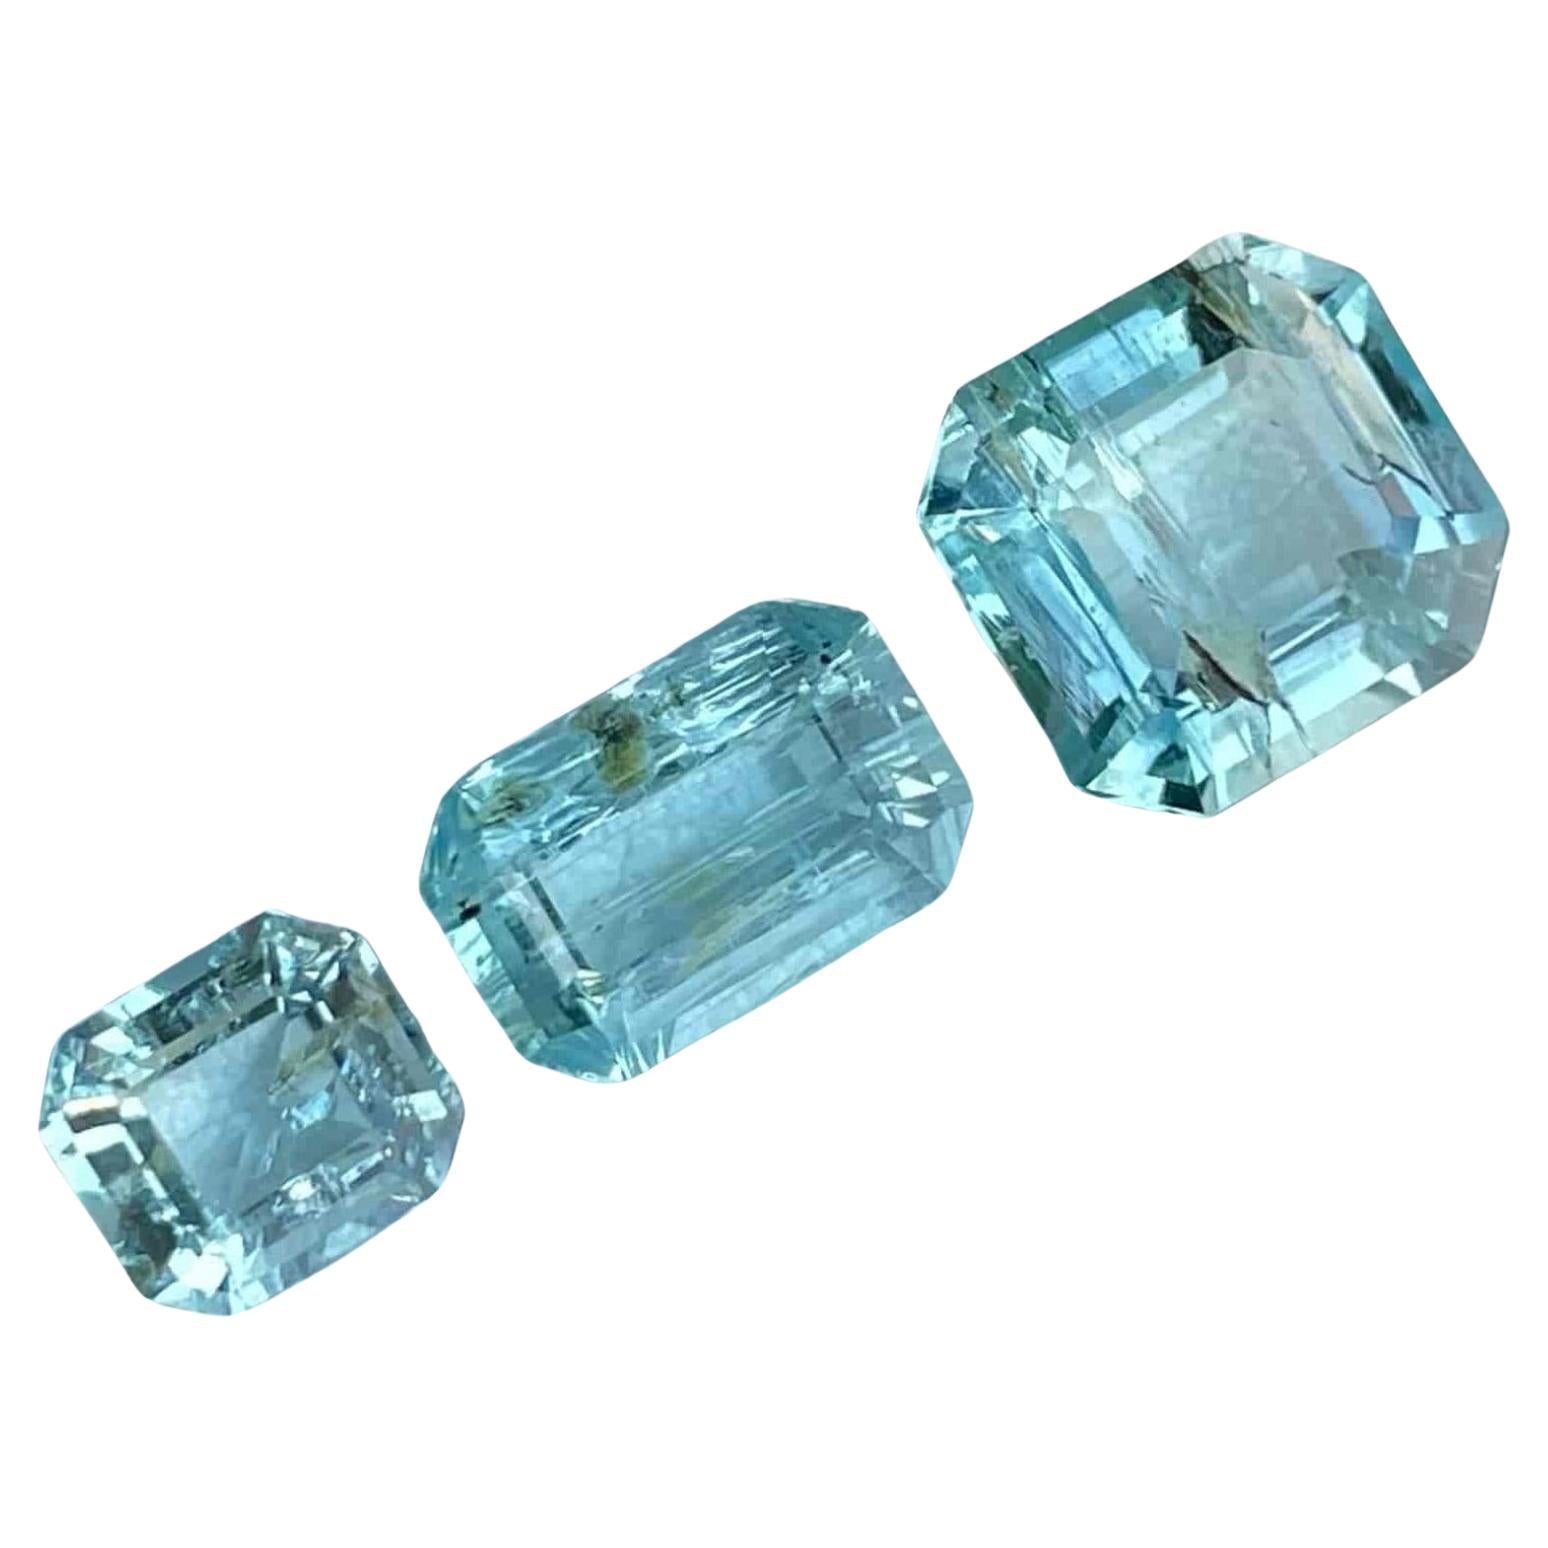 5.96 carats Deep Blue Color Natural Aquamarine Batch Loose Gemstone From Namibia For Sale